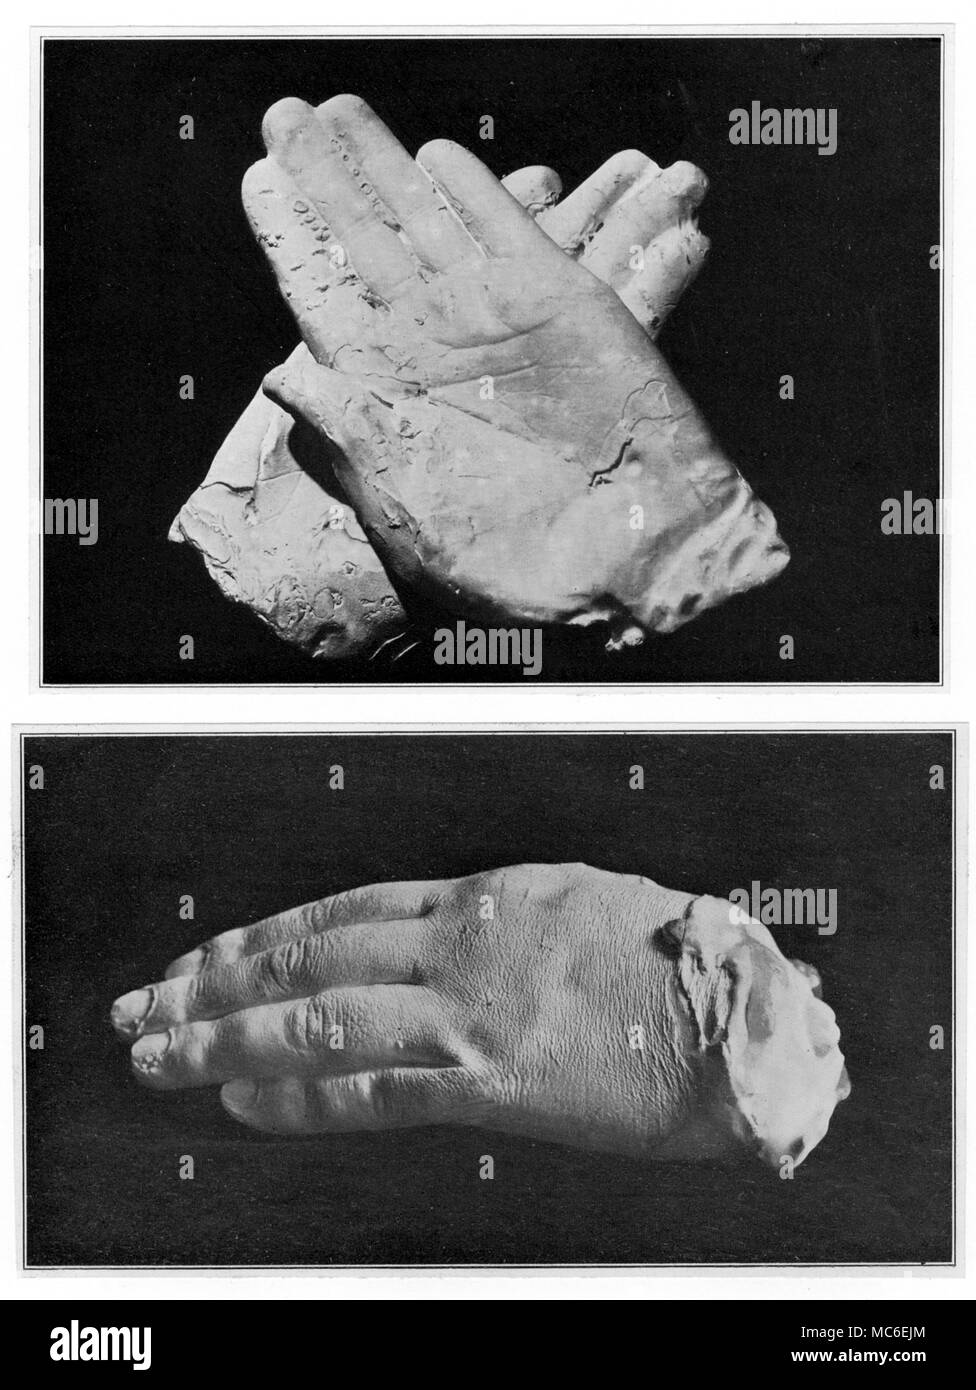 SPIRITUALISM - PLASTER CASTS Plaser casts of spirit hands (made from wax moulds of materialized spirit hands), made under the mediumship of Franek Kluski, in 1925. From Psychic Science. Stock Photo